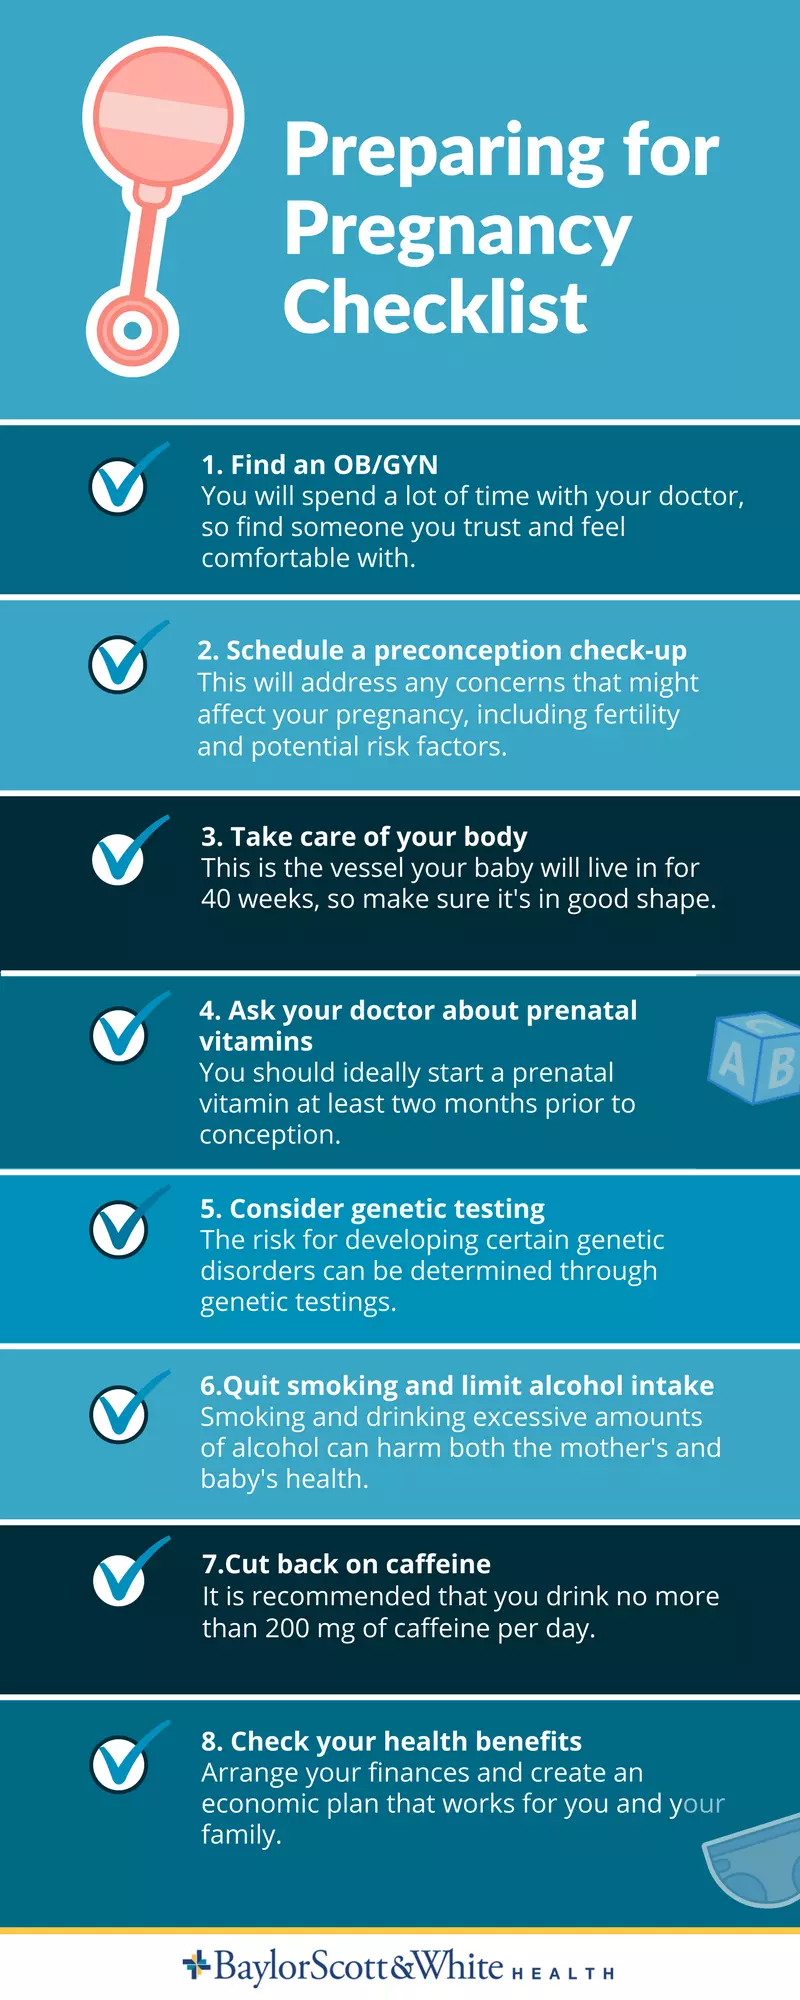 Important Check Ups & Tests To Do Before Pregnancy